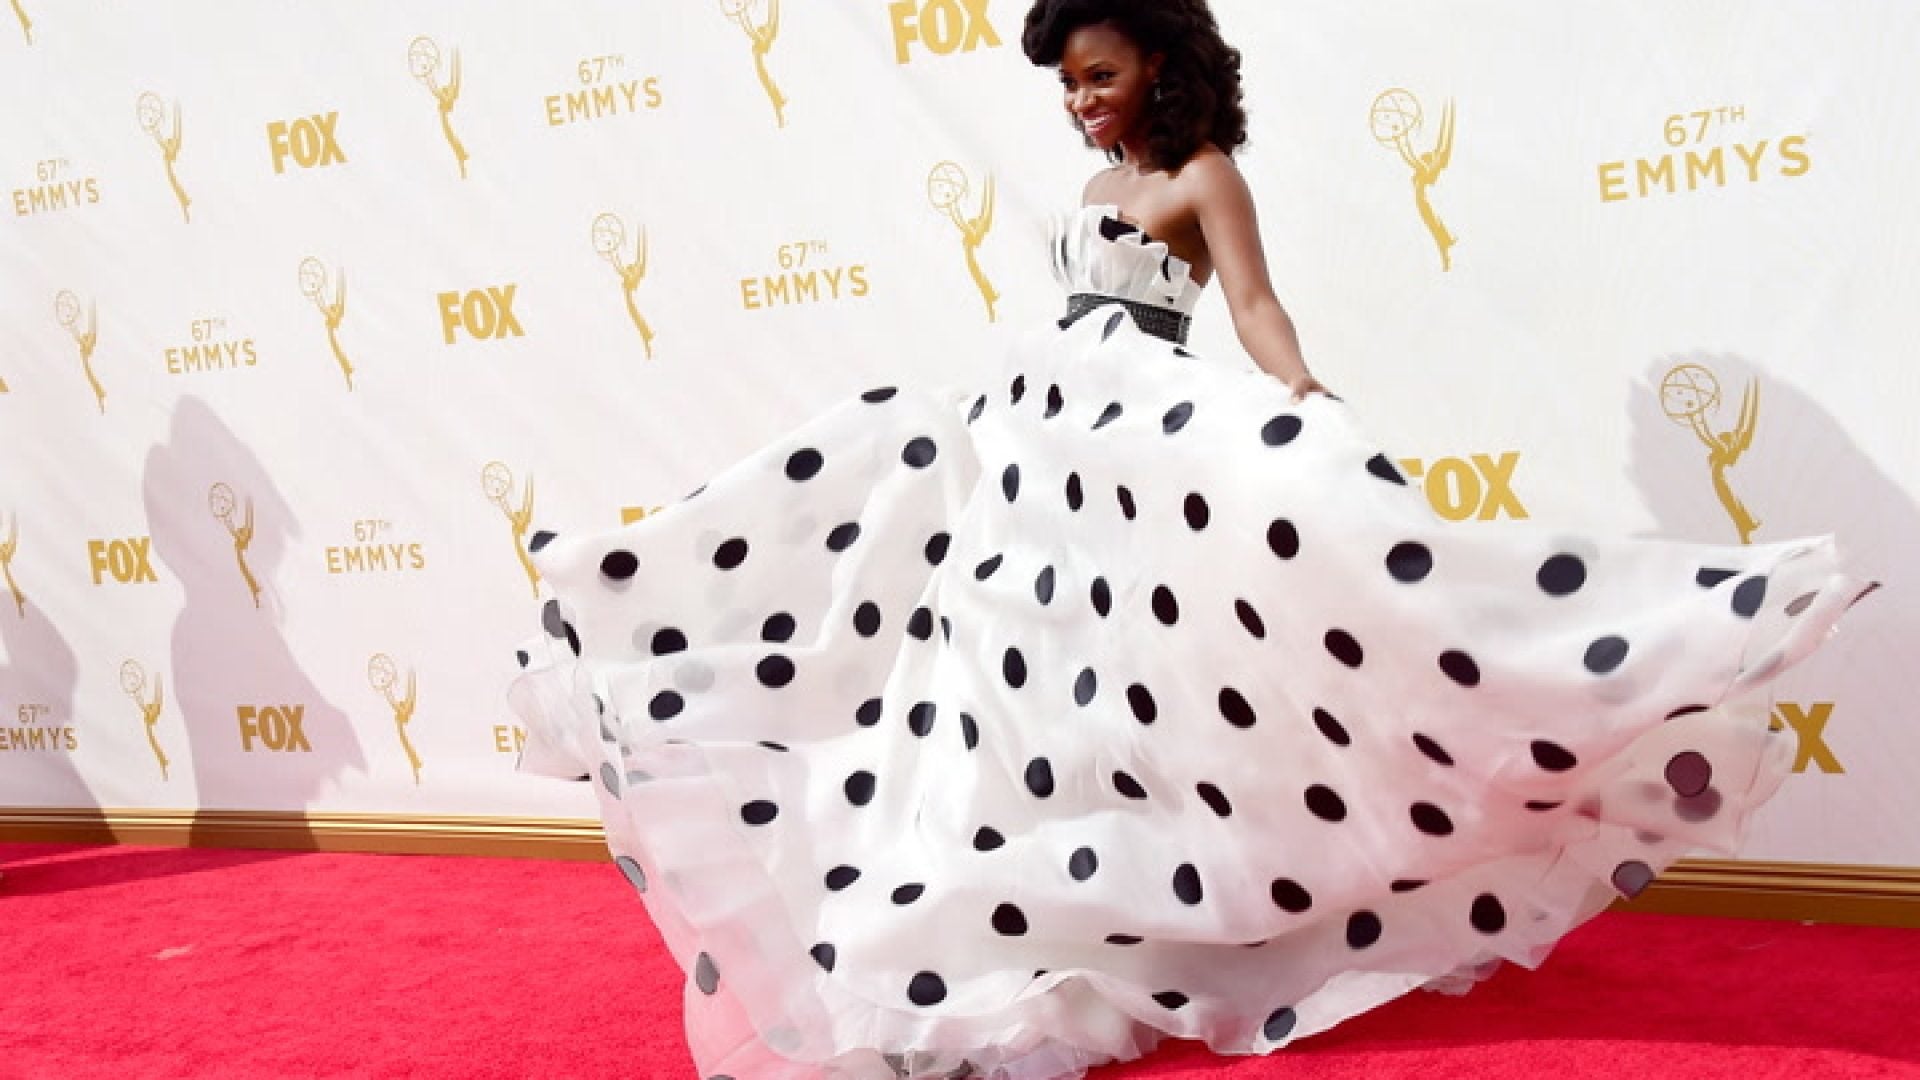 WATCH: Teyonah Parris On Being An Example